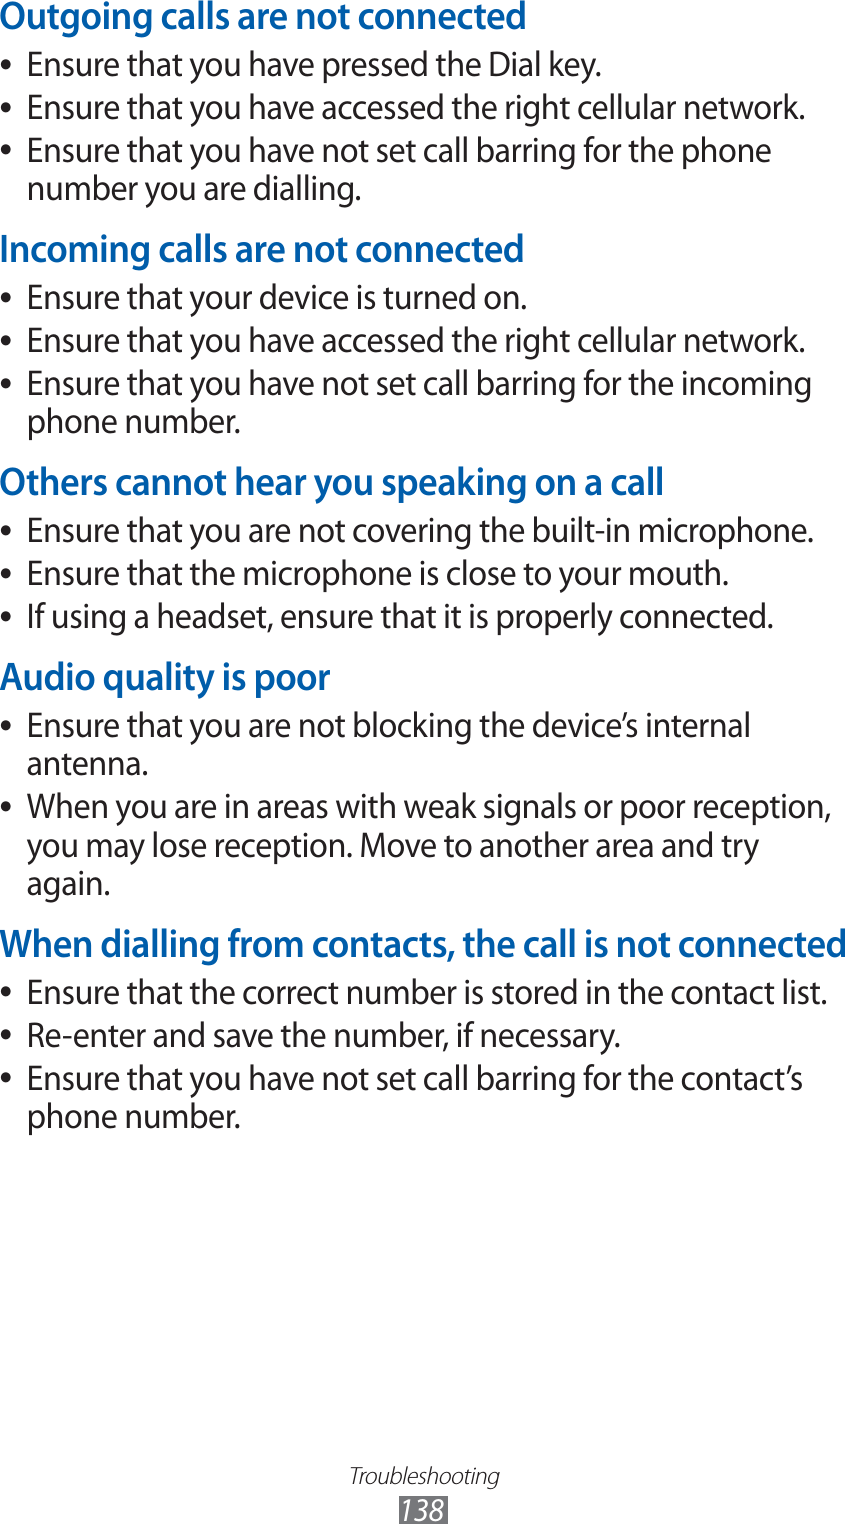 Troubleshooting138Outgoing calls are not connectedEnsure that you have pressed the Dial key. ●Ensure that you have accessed the right cellular network. ●Ensure that you have not set call barring for the phone  ●number you are dialling.Incoming calls are not connectedEnsure that your device is turned on. ●Ensure that you have accessed the right cellular network. ●Ensure that you have not set call barring for the incoming  ●phone number.Others cannot hear you speaking on a callEnsure that you are not covering the built-in microphone. ●Ensure that the microphone is close to your mouth. ●If using a headset, ensure that it is properly connected. ●Audio quality is poorEnsure that you are not blocking the device’s internal  ●antenna.When you are in areas with weak signals or poor reception,  ●you may lose reception. Move to another area and try again.When dialling from contacts, the call is not connectedEnsure that the correct number is stored in the contact list. ●Re-enter and save the number, if necessary. ●Ensure that you have not set call barring for the contact’s  ●phone number.